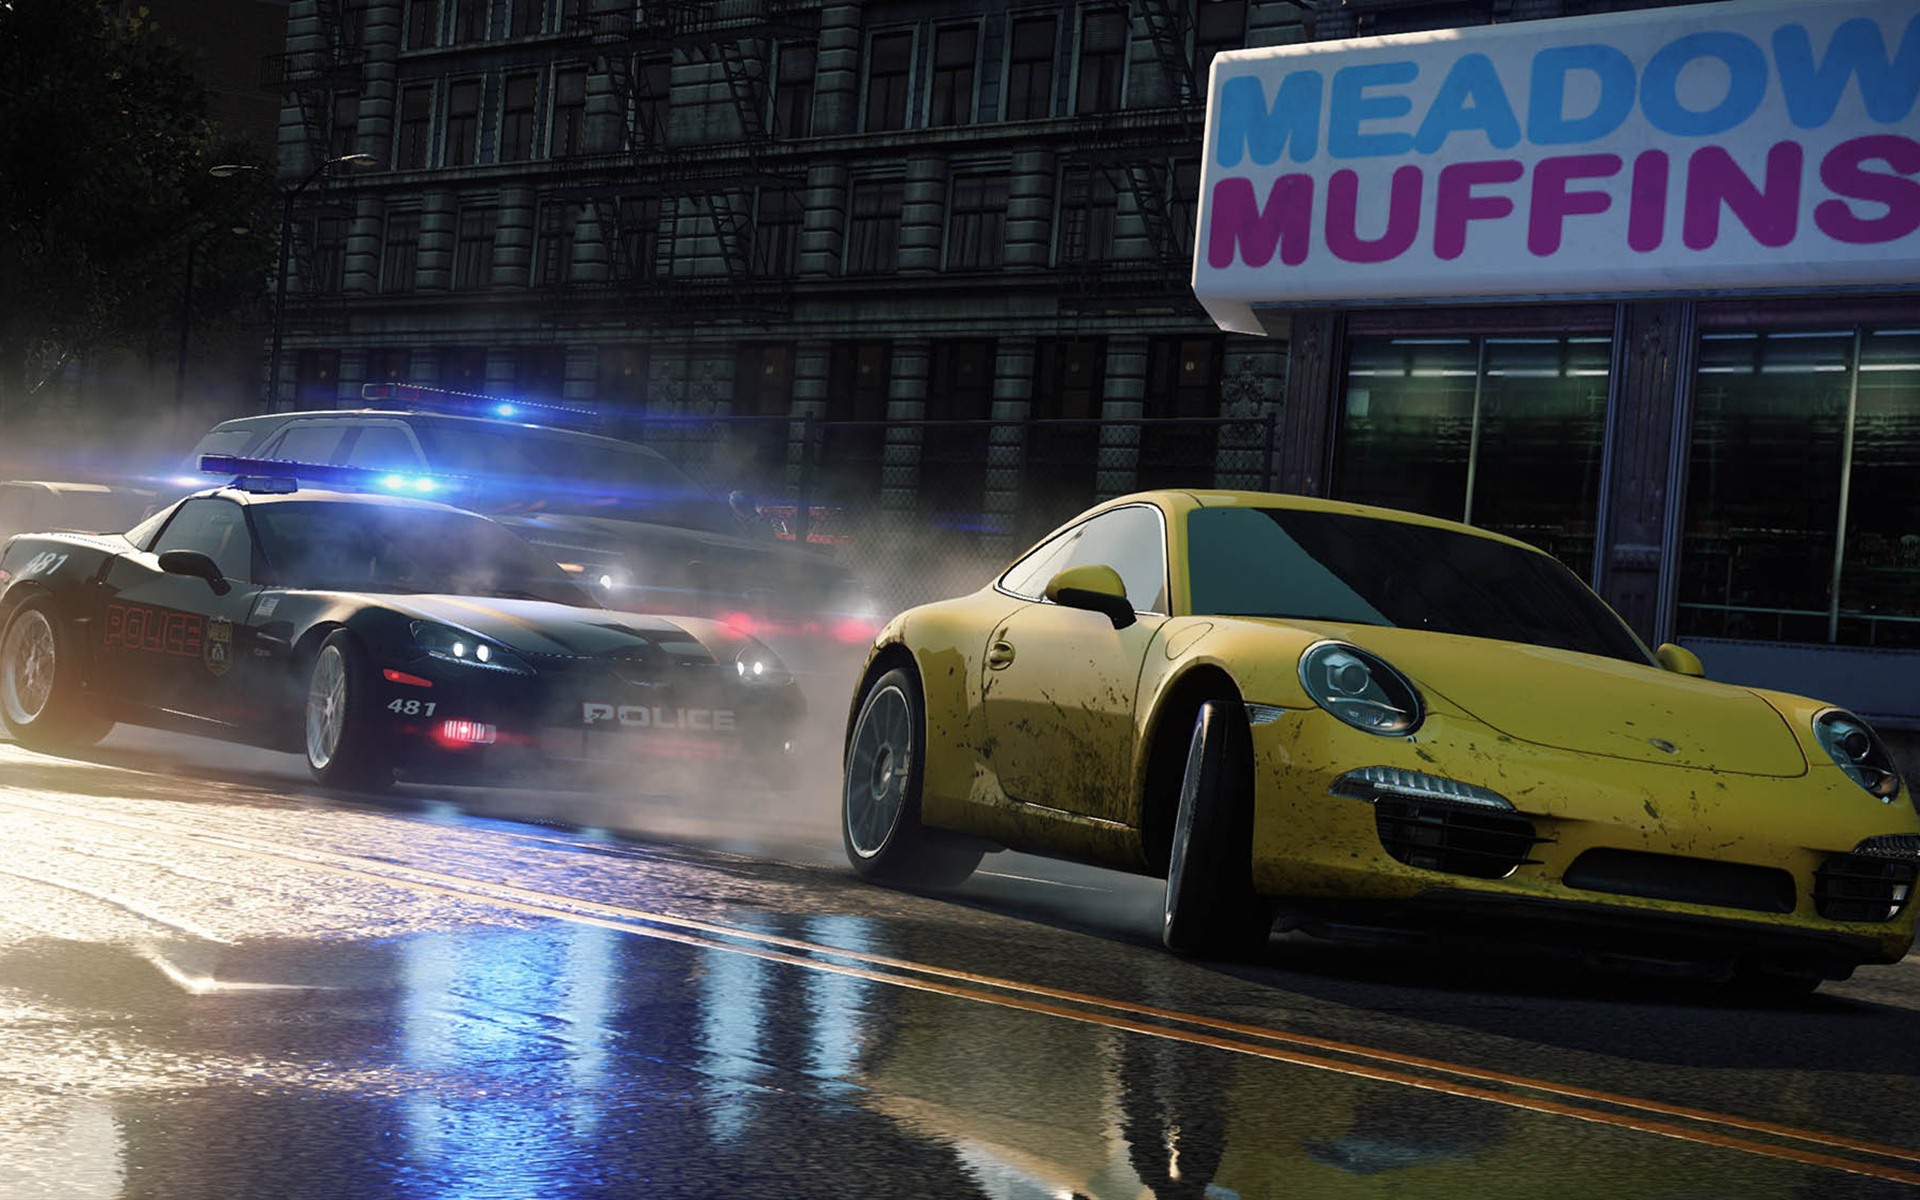 Need for Speed: Most Wanted 极品飞车17：最高通缉 高清壁纸17 - 1920x1200